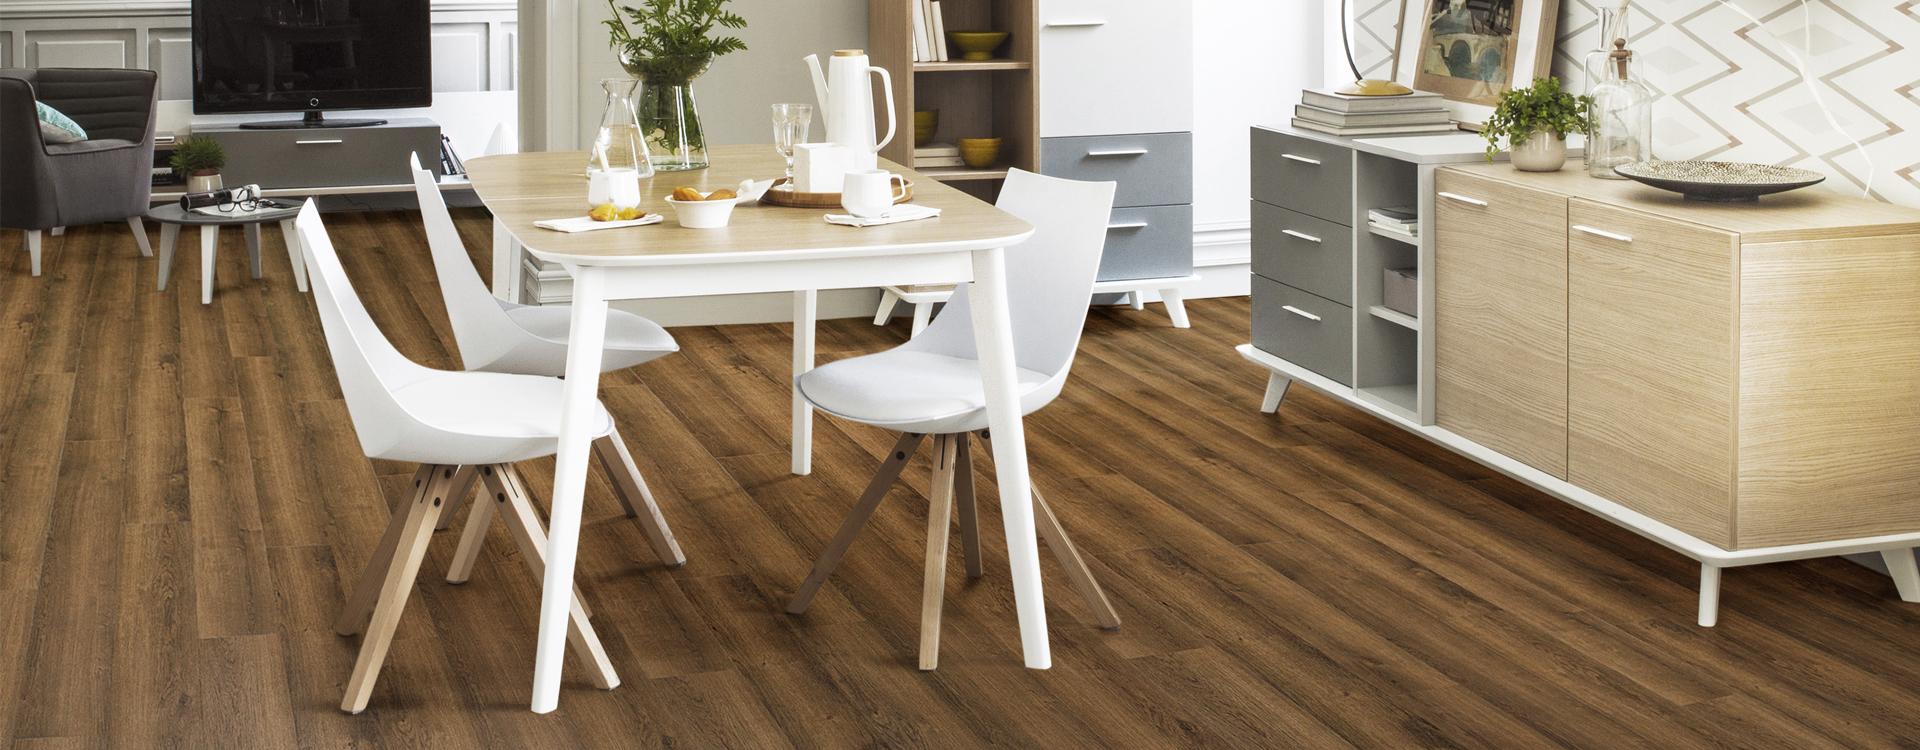 Horizen Flooring presents to you a picture of a quality wide plank Fawn luxury vinyl plank. NovoCore Premium collection features a wide range of colors & designs that will compliment any interior. Natural wood grain synchronized surface allow for an authentic hardwood look & feel. This collection features a 0.25″ / 6.5 mm overall thickness and a durable 22 mil / 0.55 mm wear layer for residential and commercial applications.